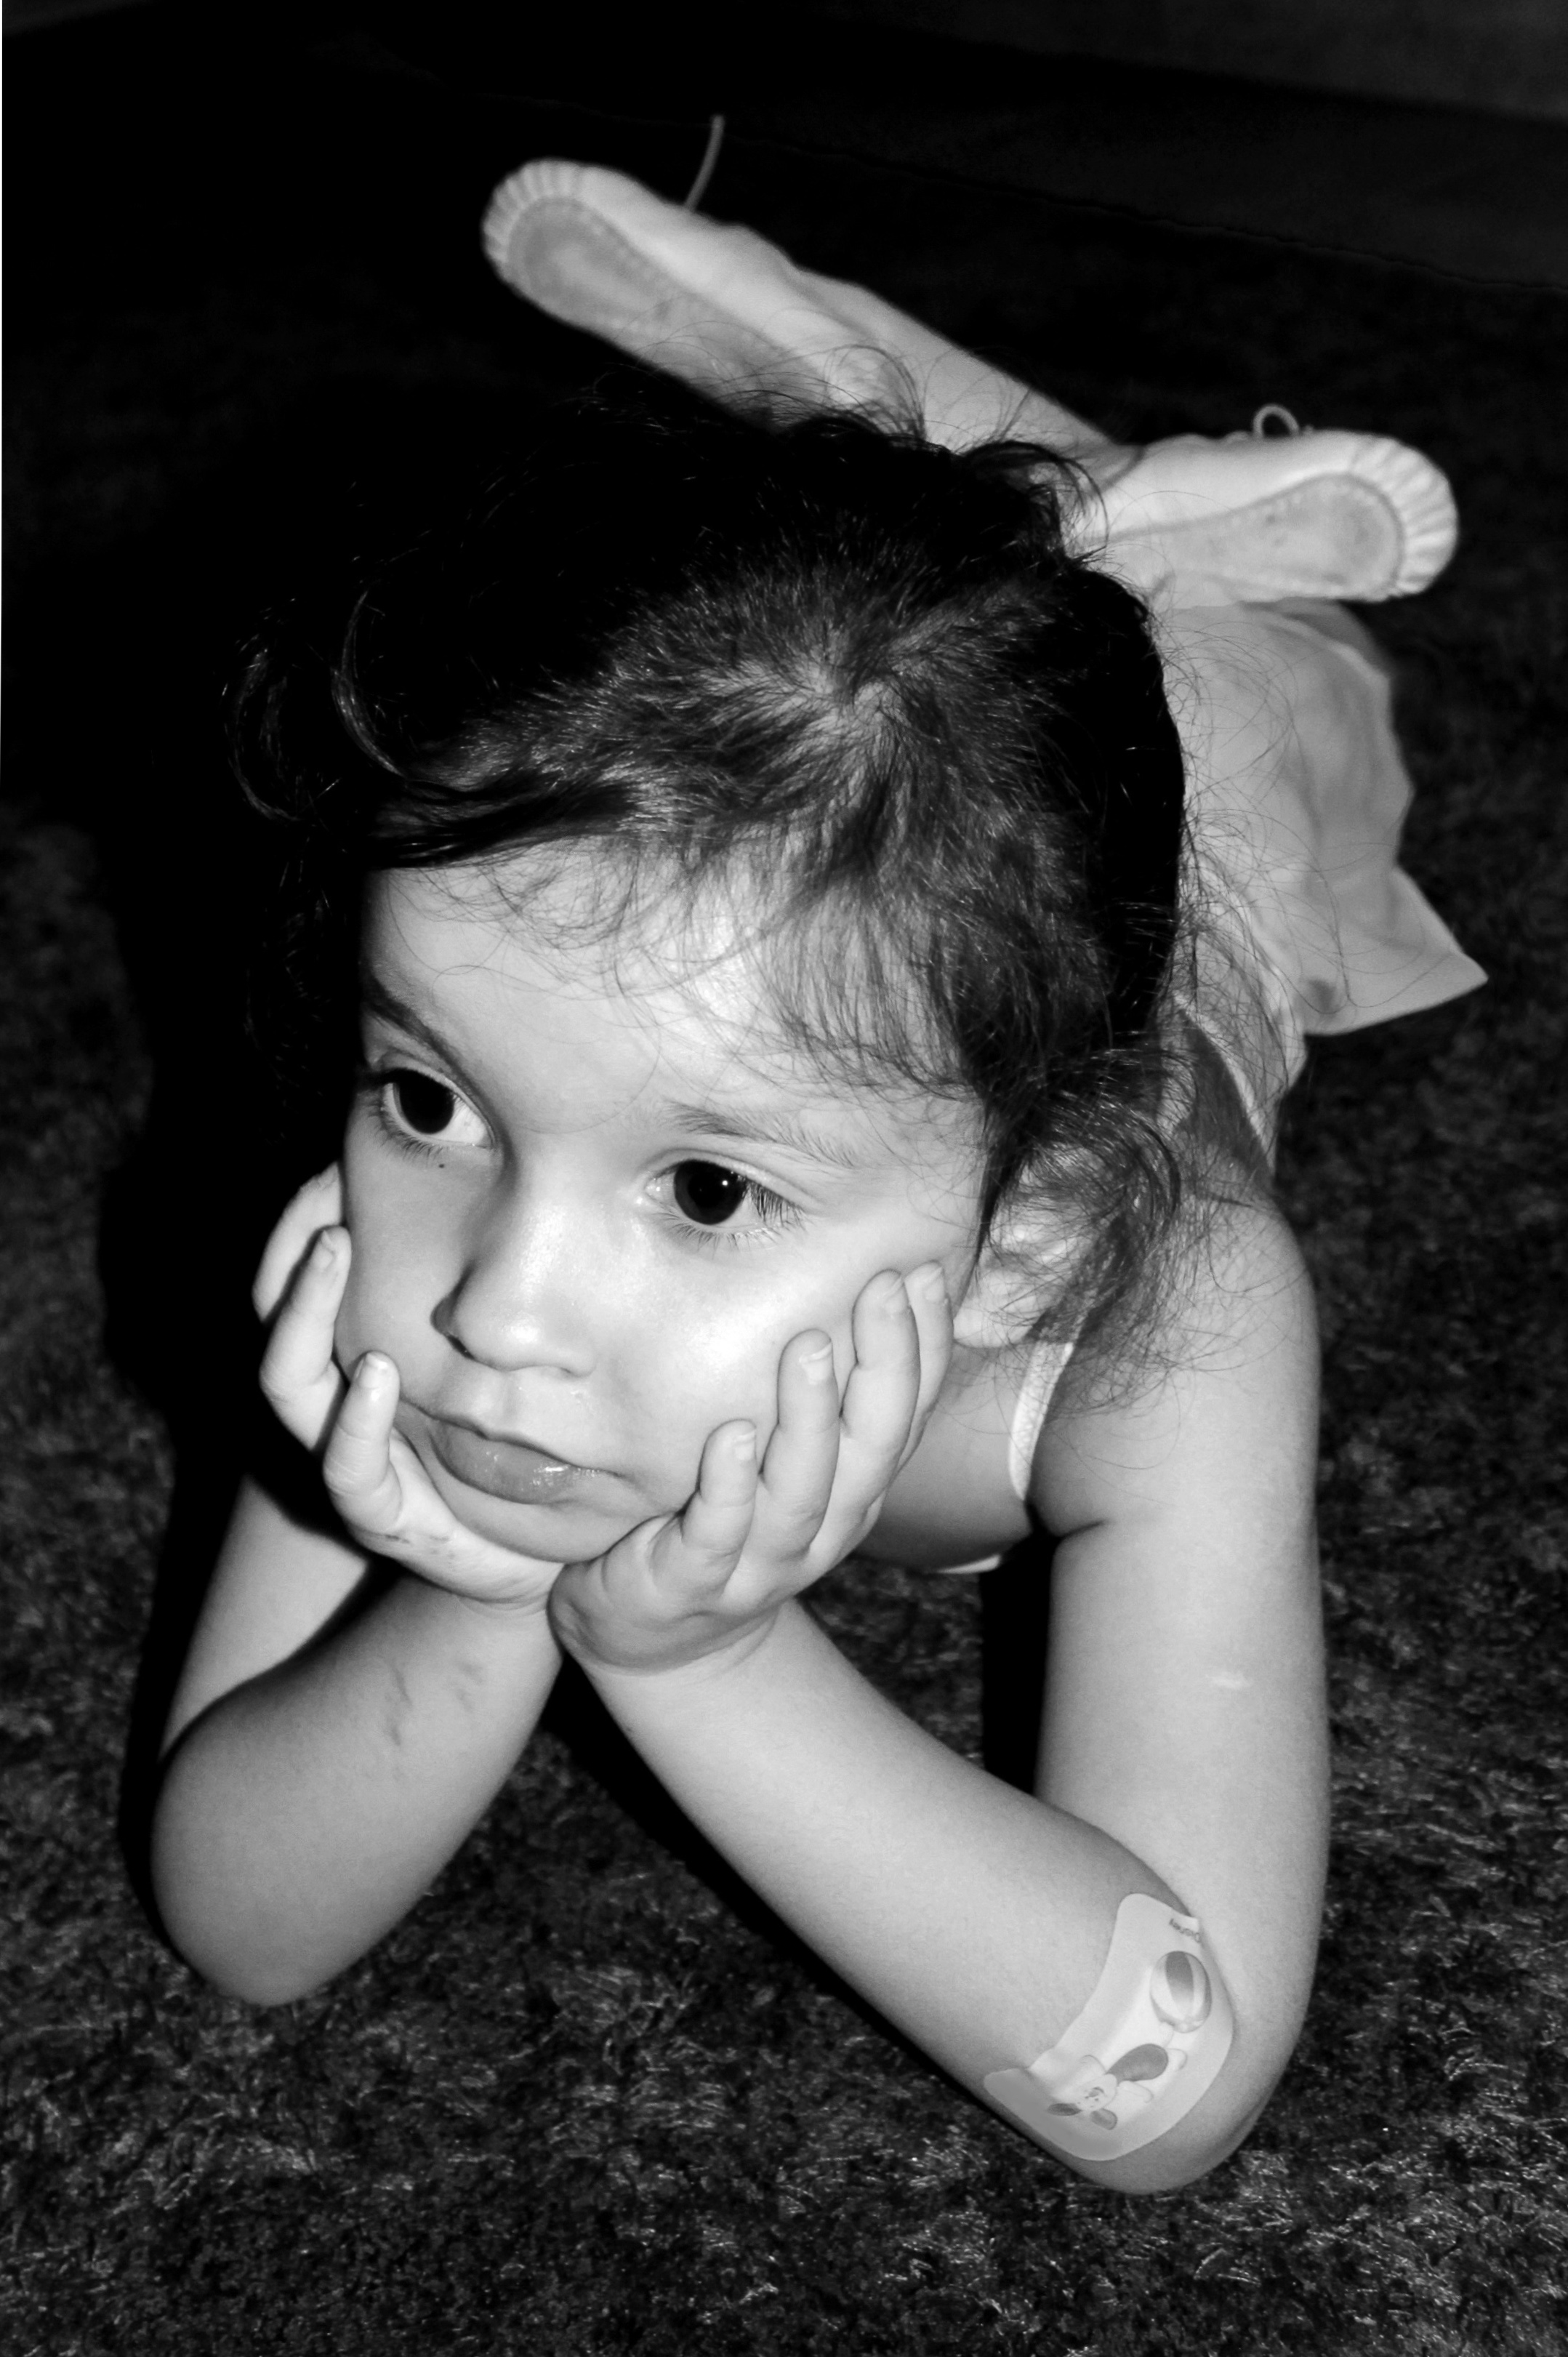 Thoughtful young ballerina with a band aid on the elbow photo